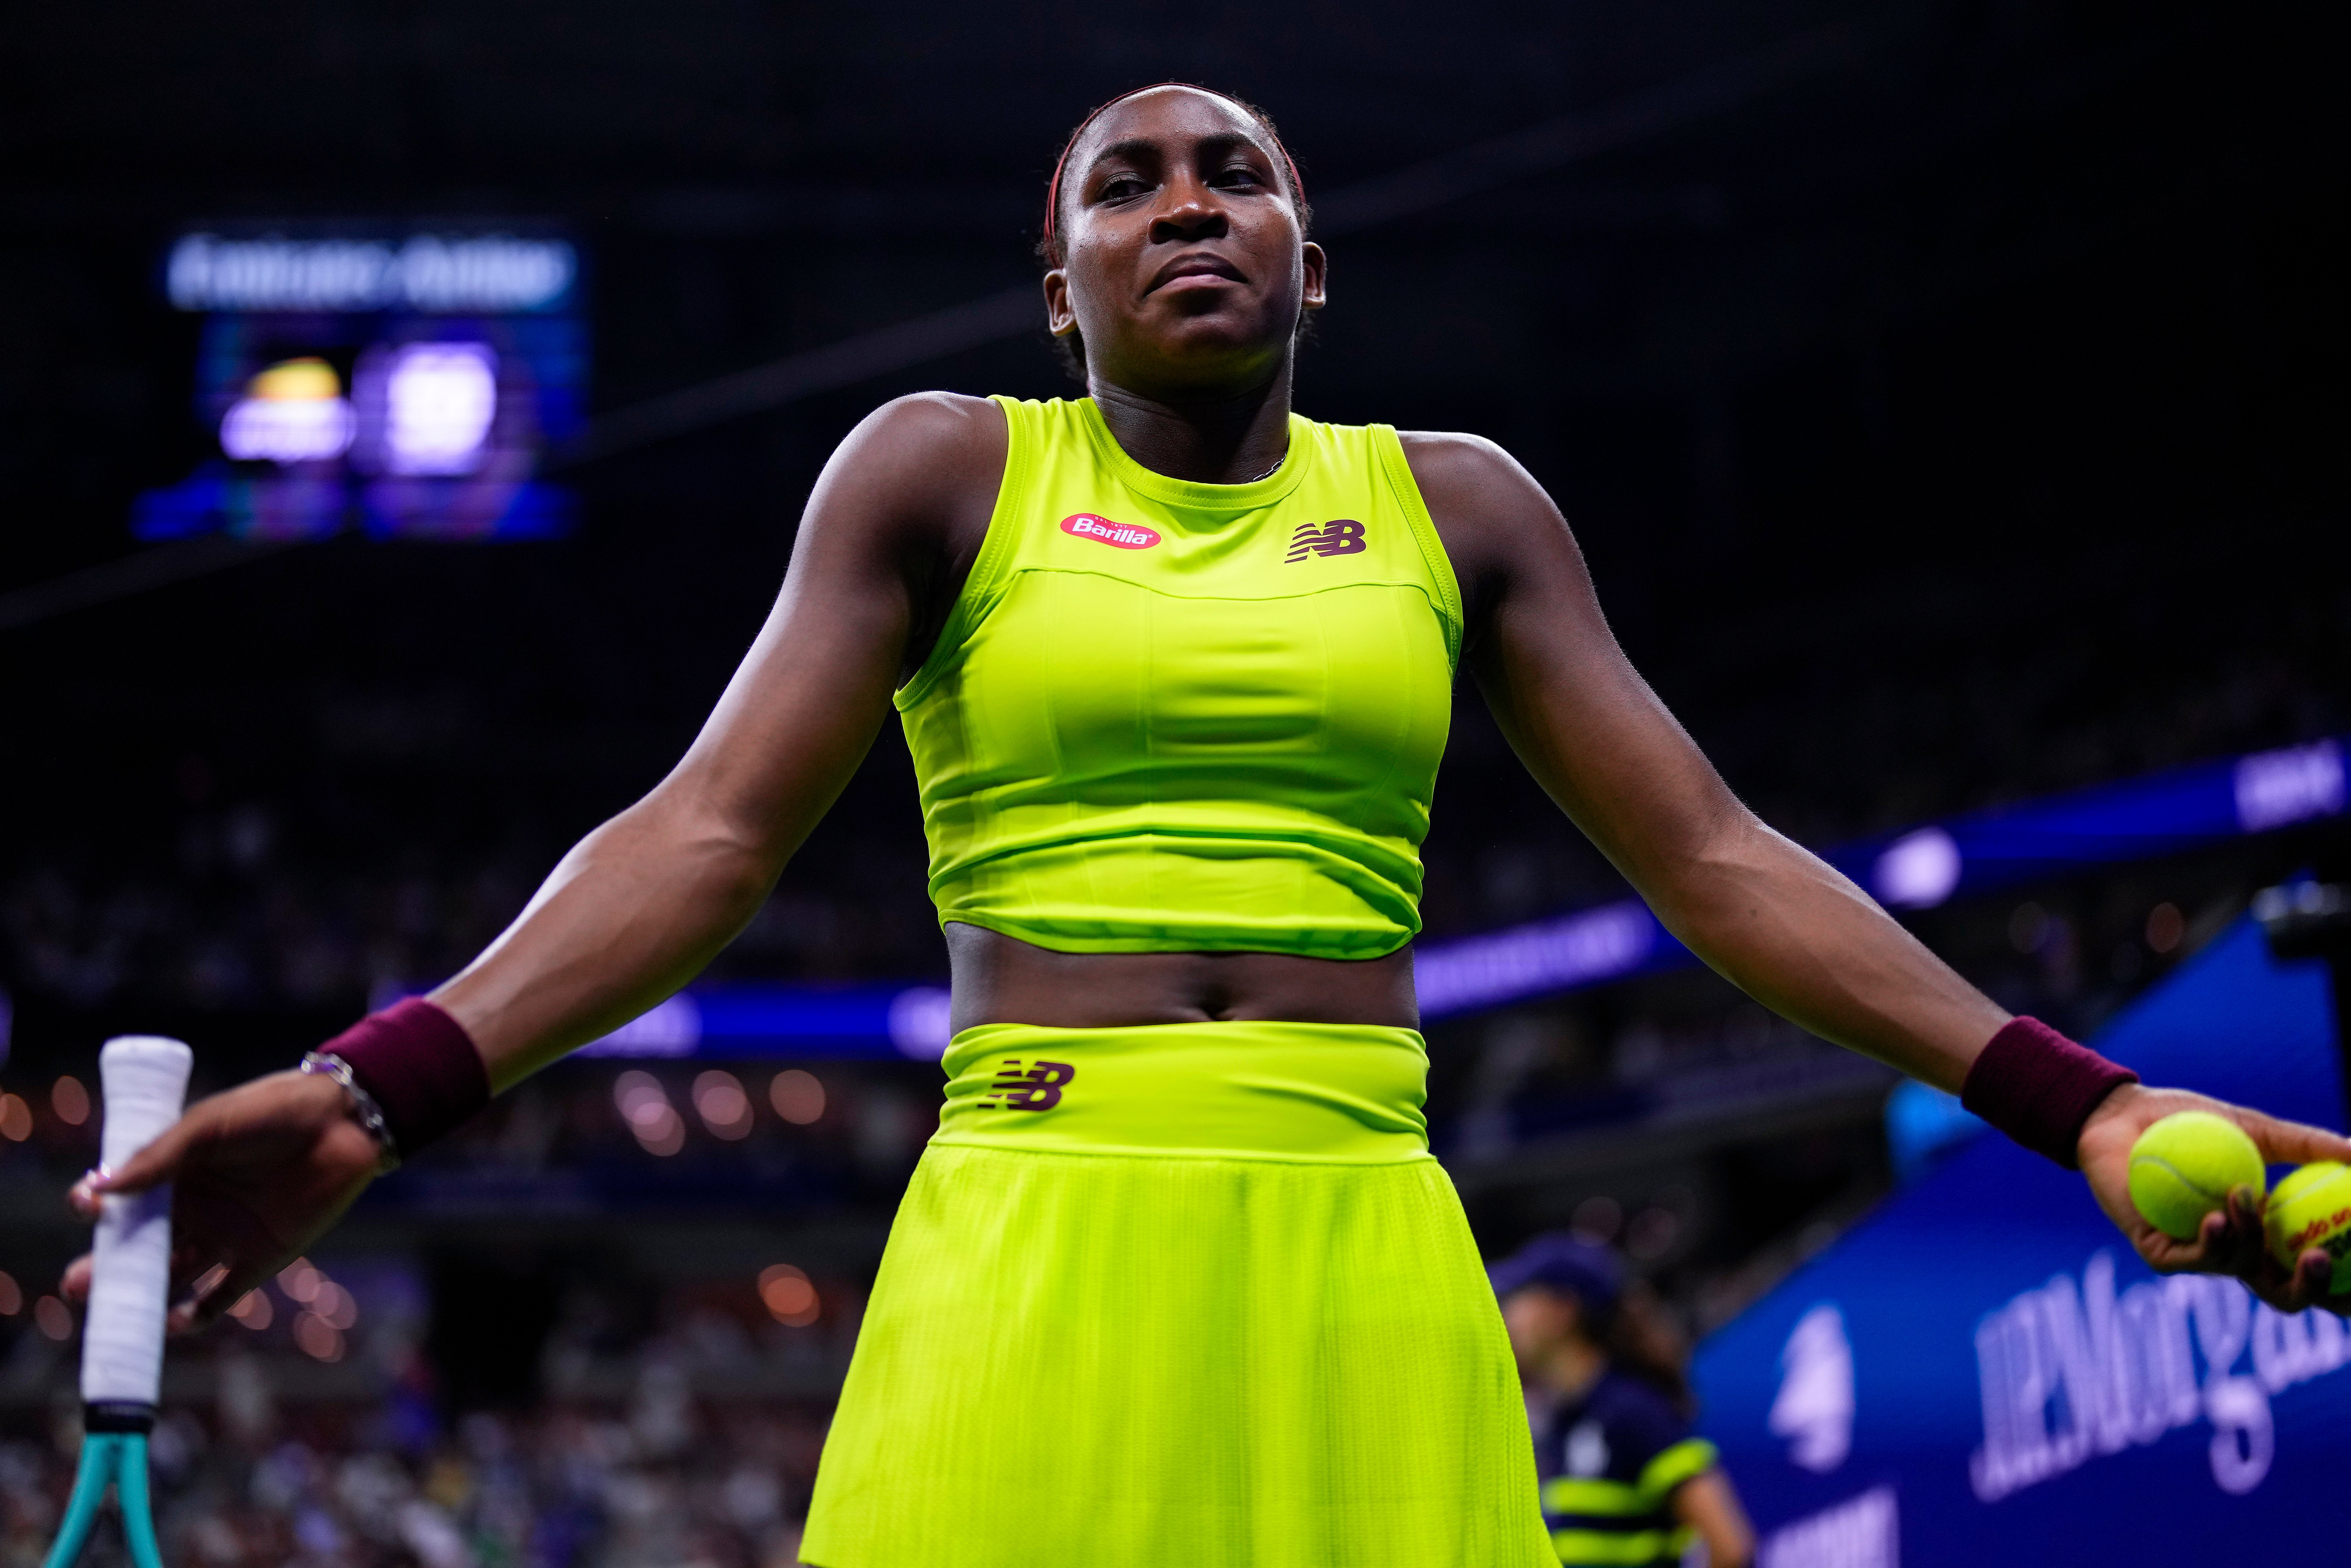 Coco Gauff reacts as protesters disrupt her match against Karolina Muchova of the Czech Republic